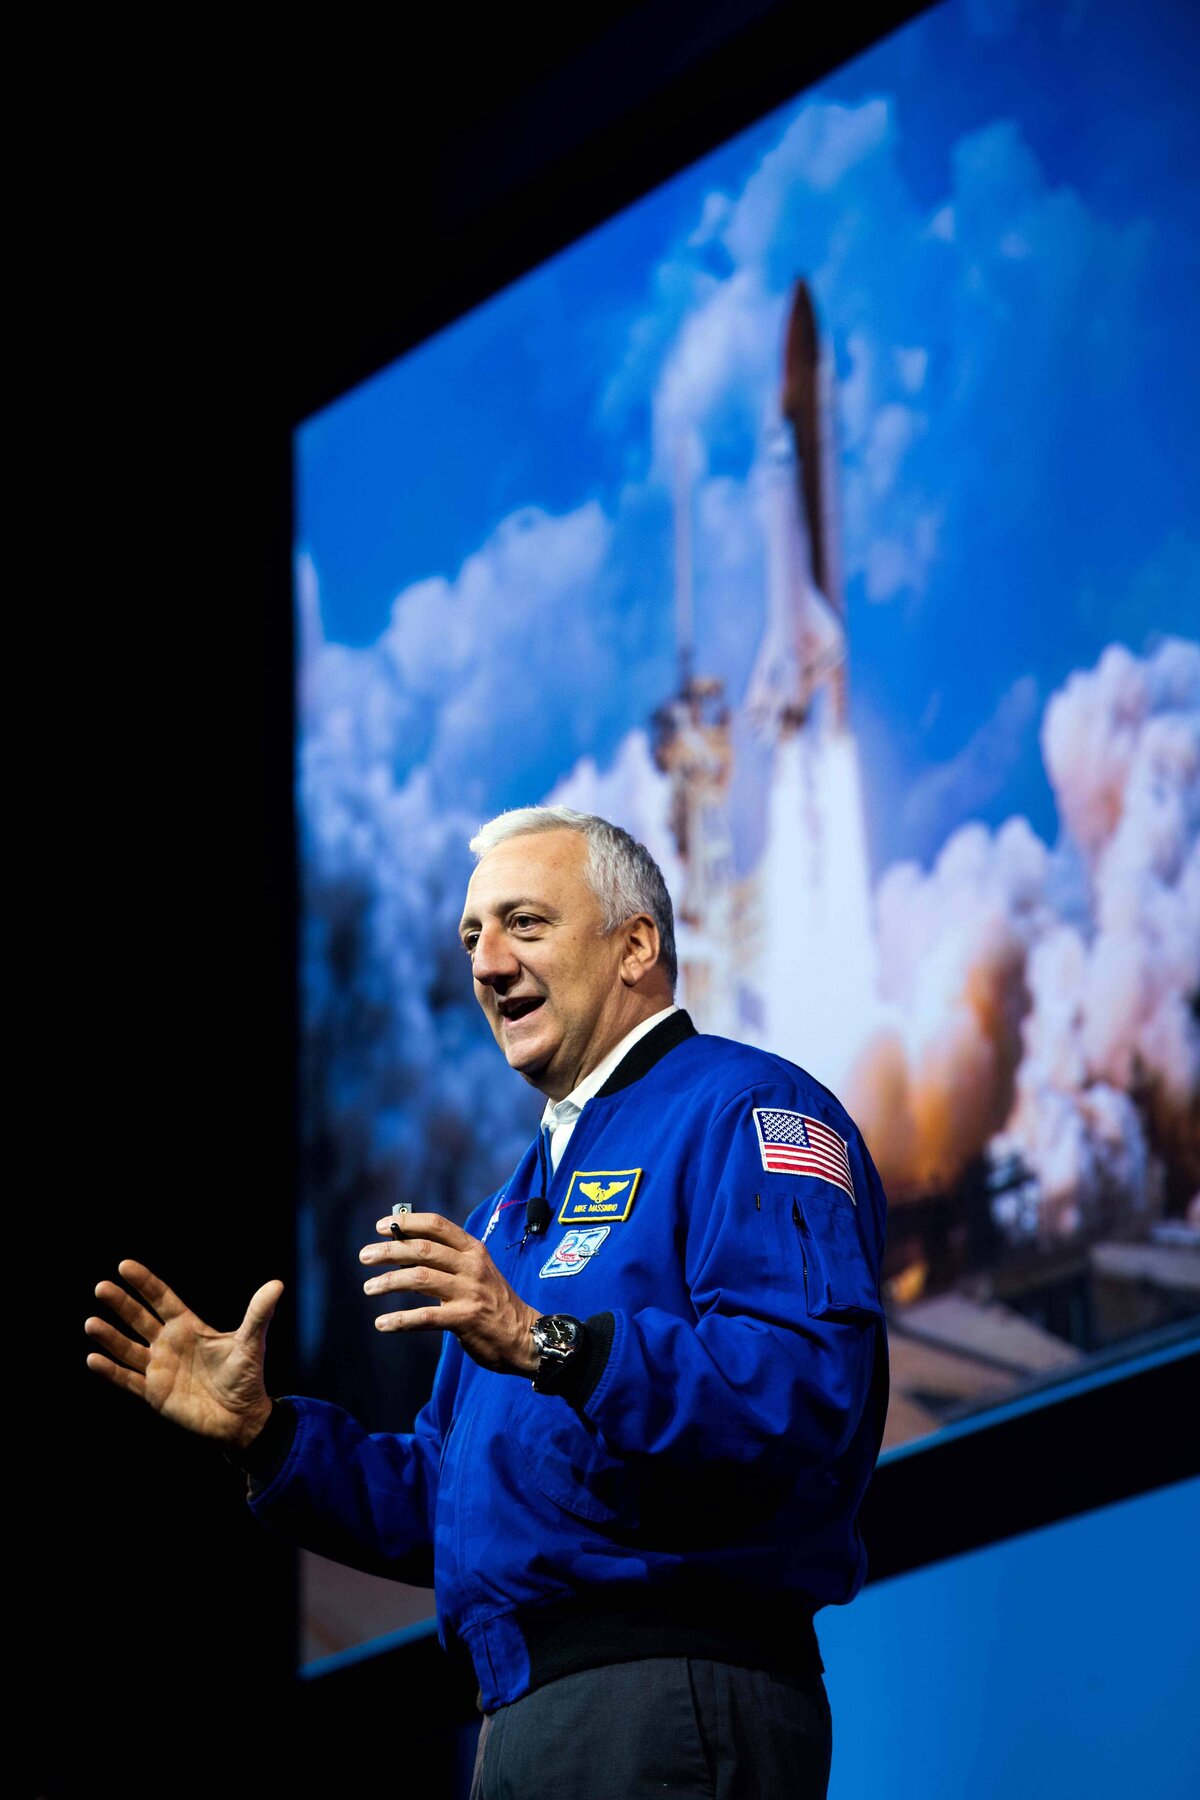 Mike Massimo speaks at conference with image of rocket ship behind him